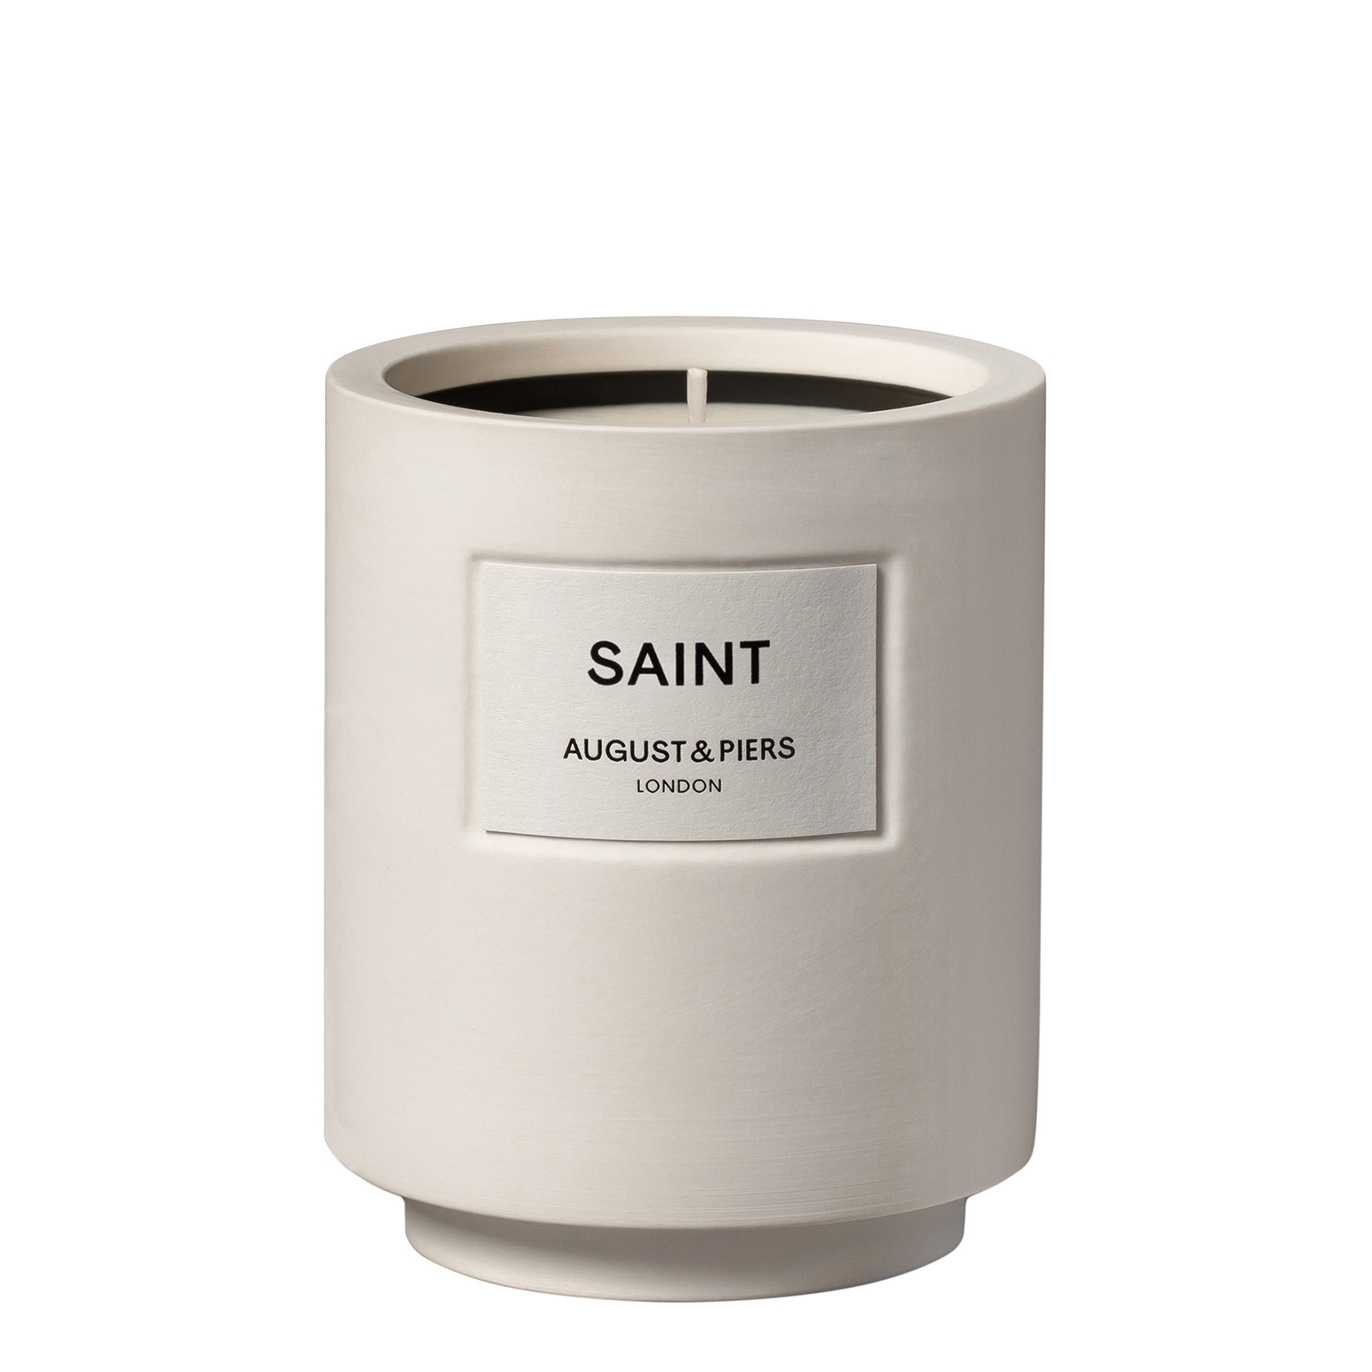 August & Piers Saint Scented Candle 340g